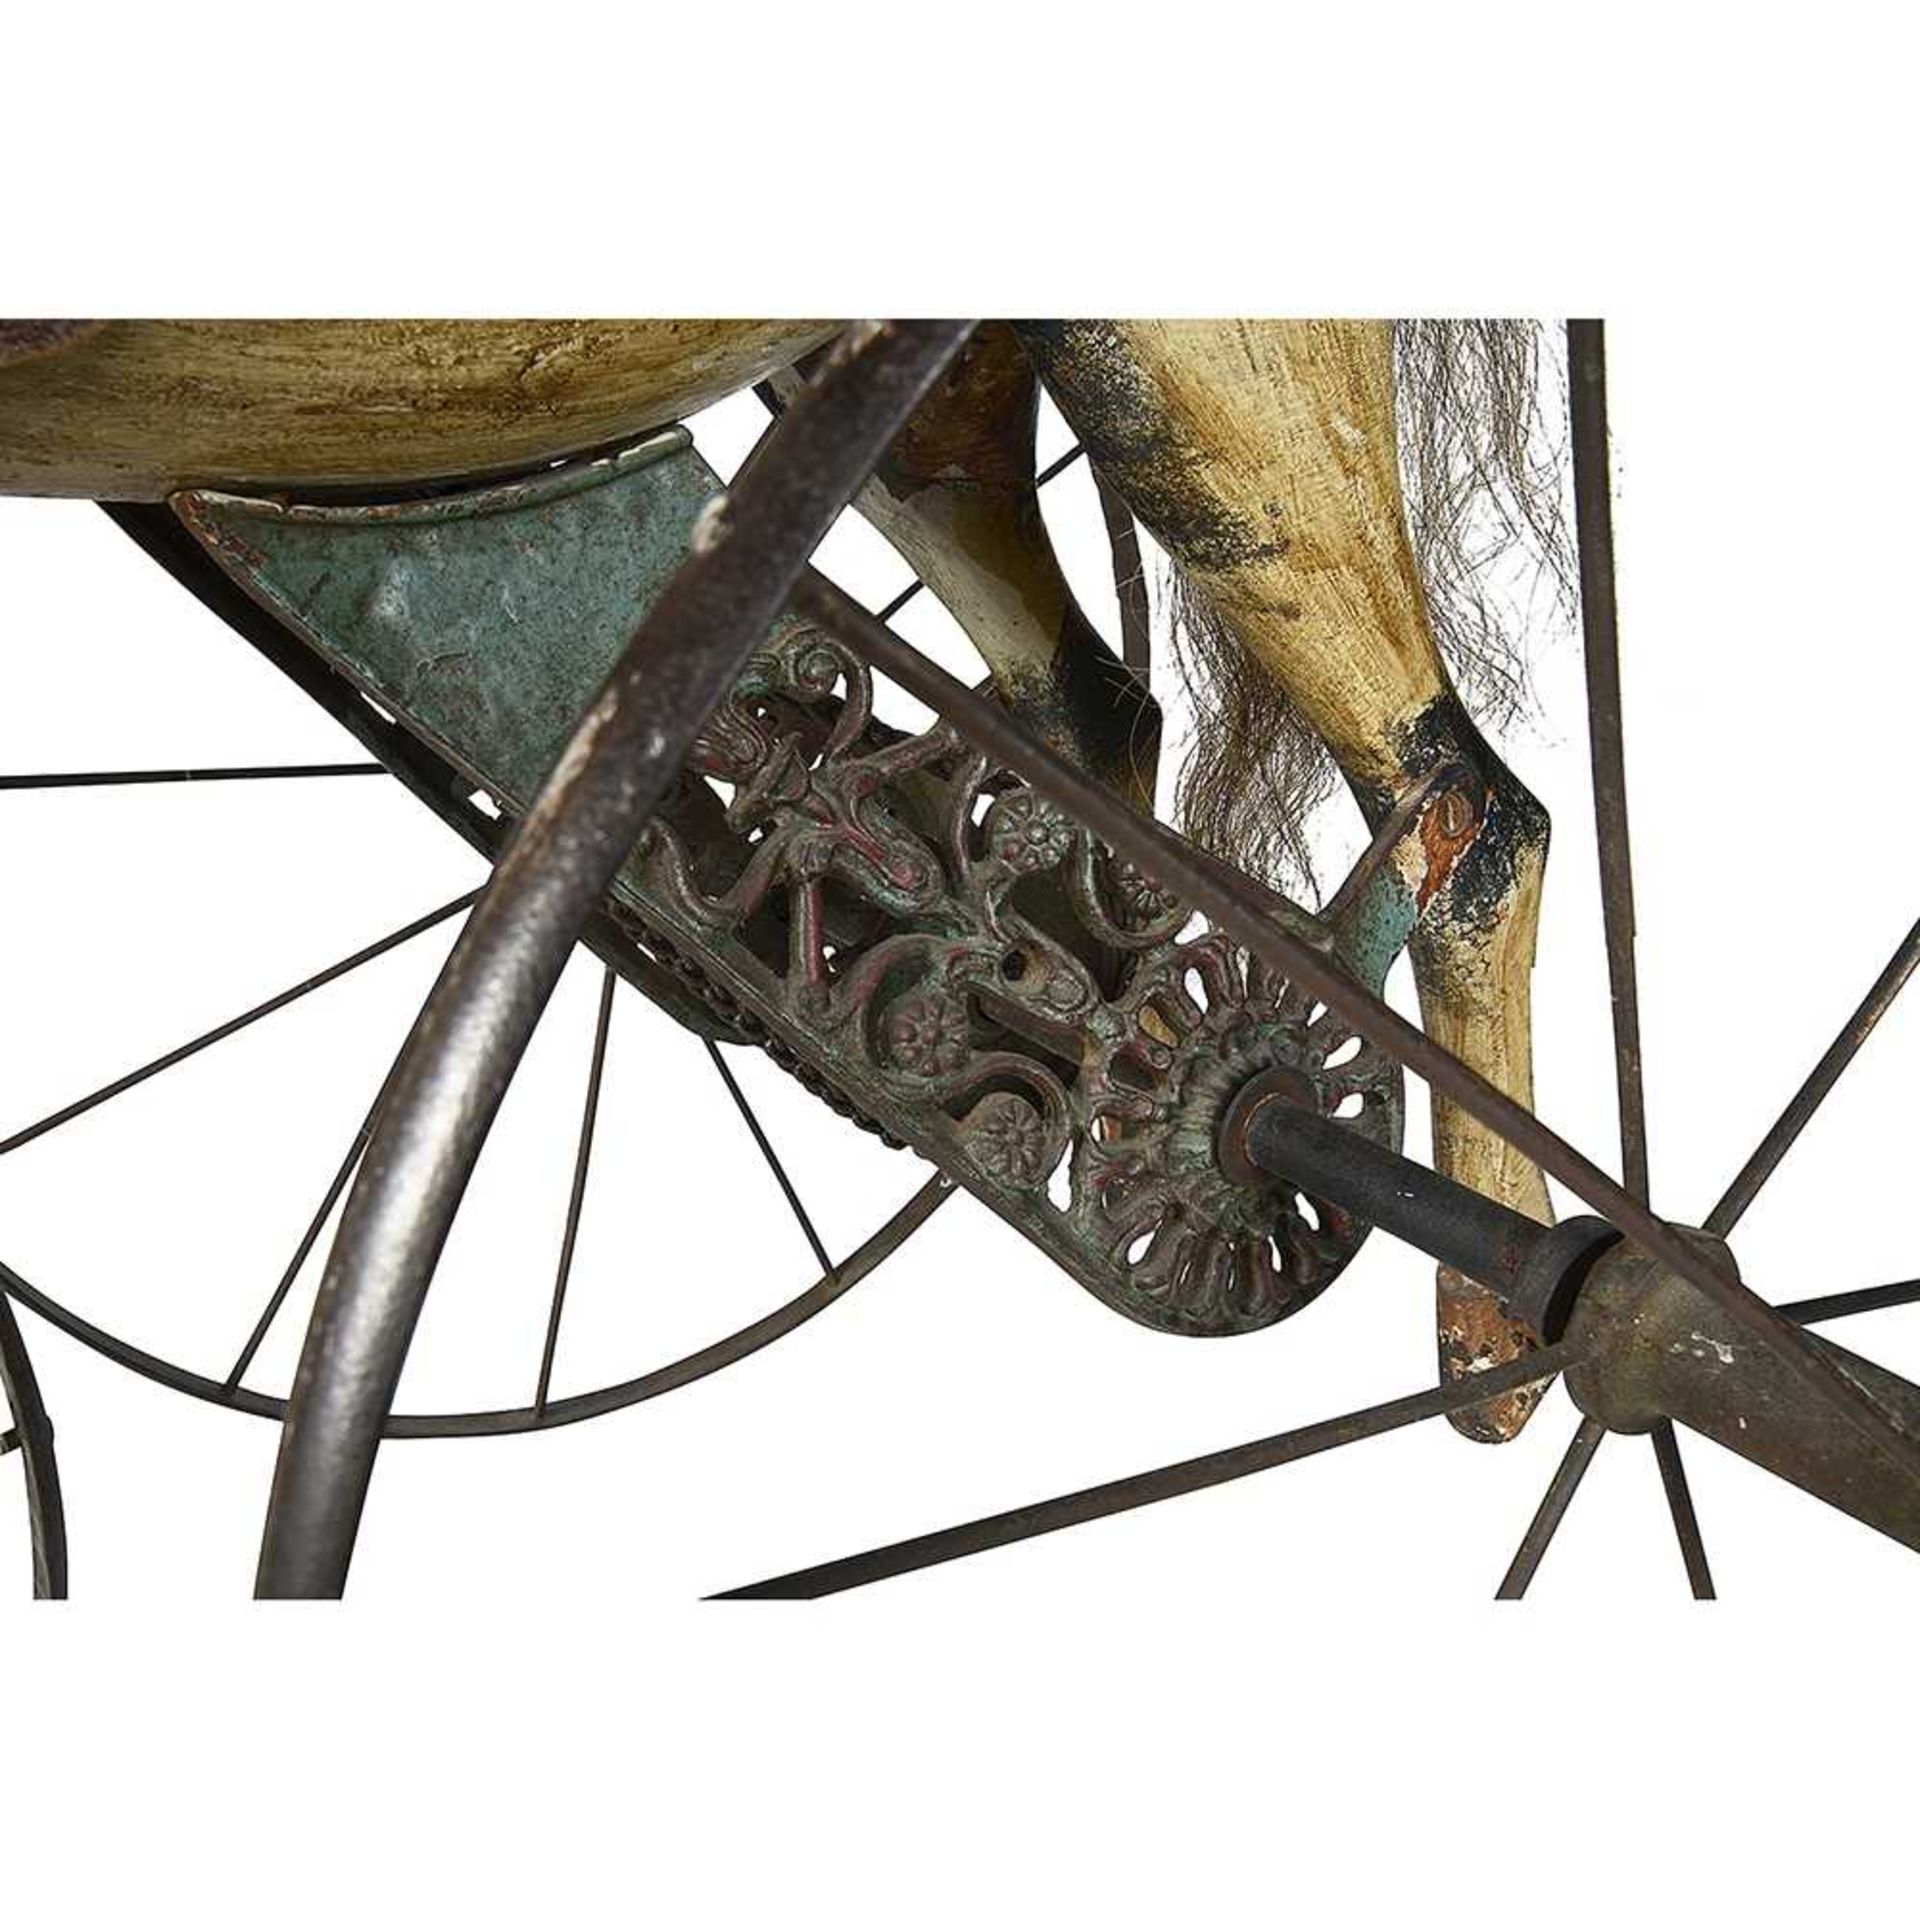 A LATE 19TH CENTURY FRENCH PAINTED WOOD HORSE CHAIN DRIVEN TRICYCLE OR VELOCIPEDE - Image 6 of 12